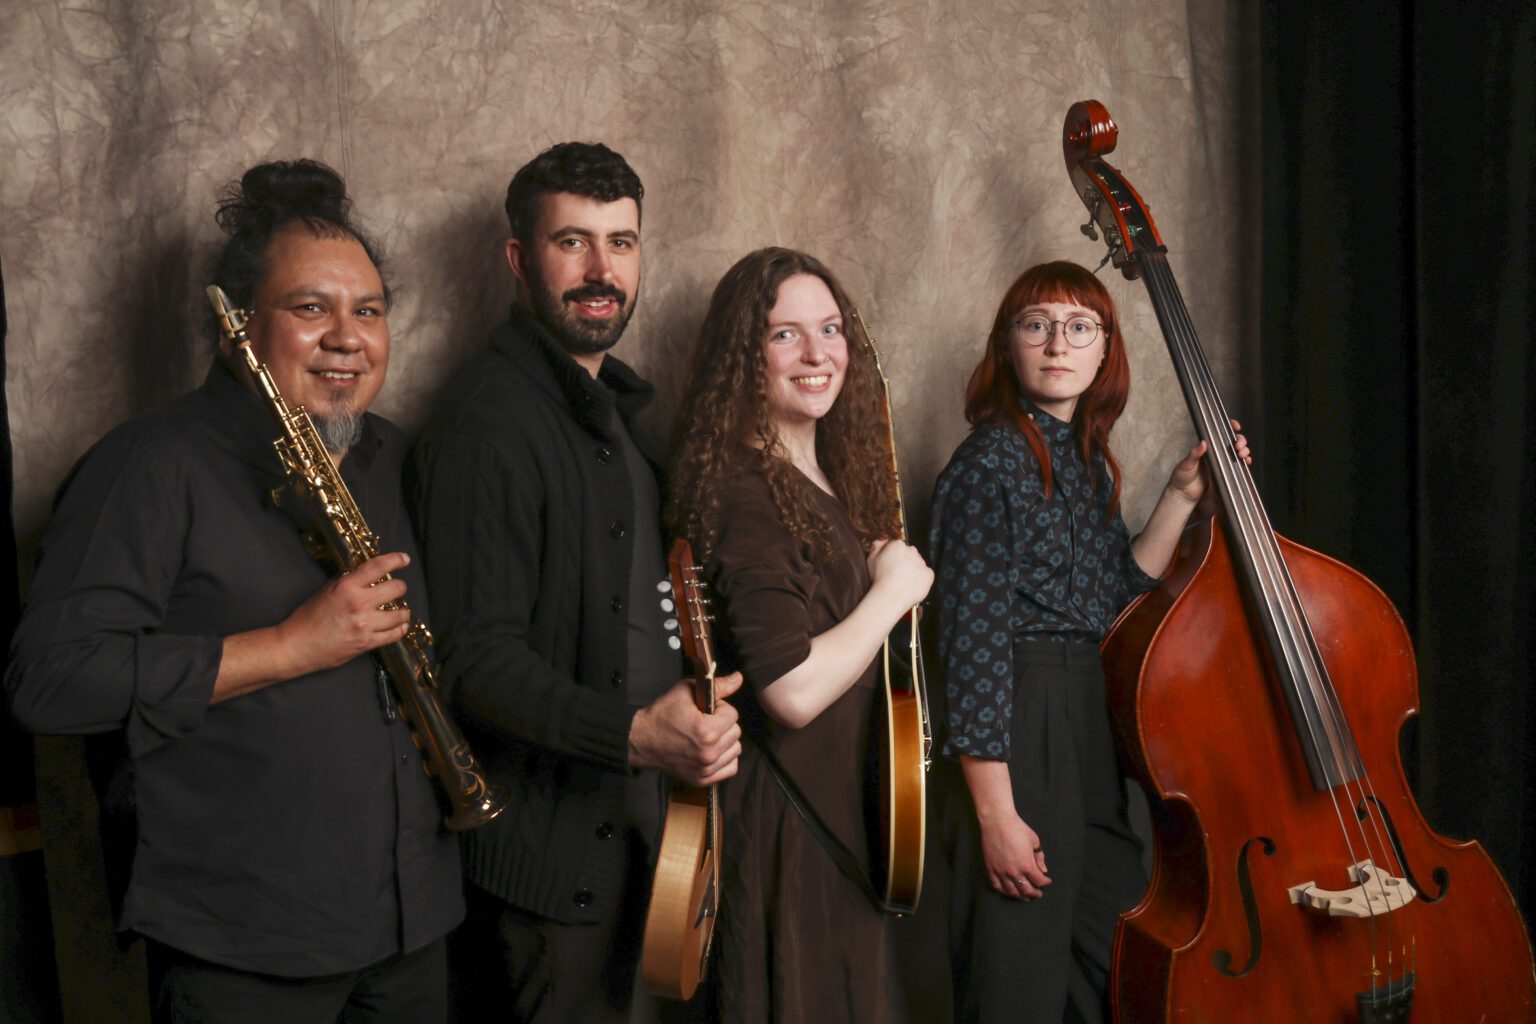 The Bellingham-based band Nuages are known for playing Manouche jazz